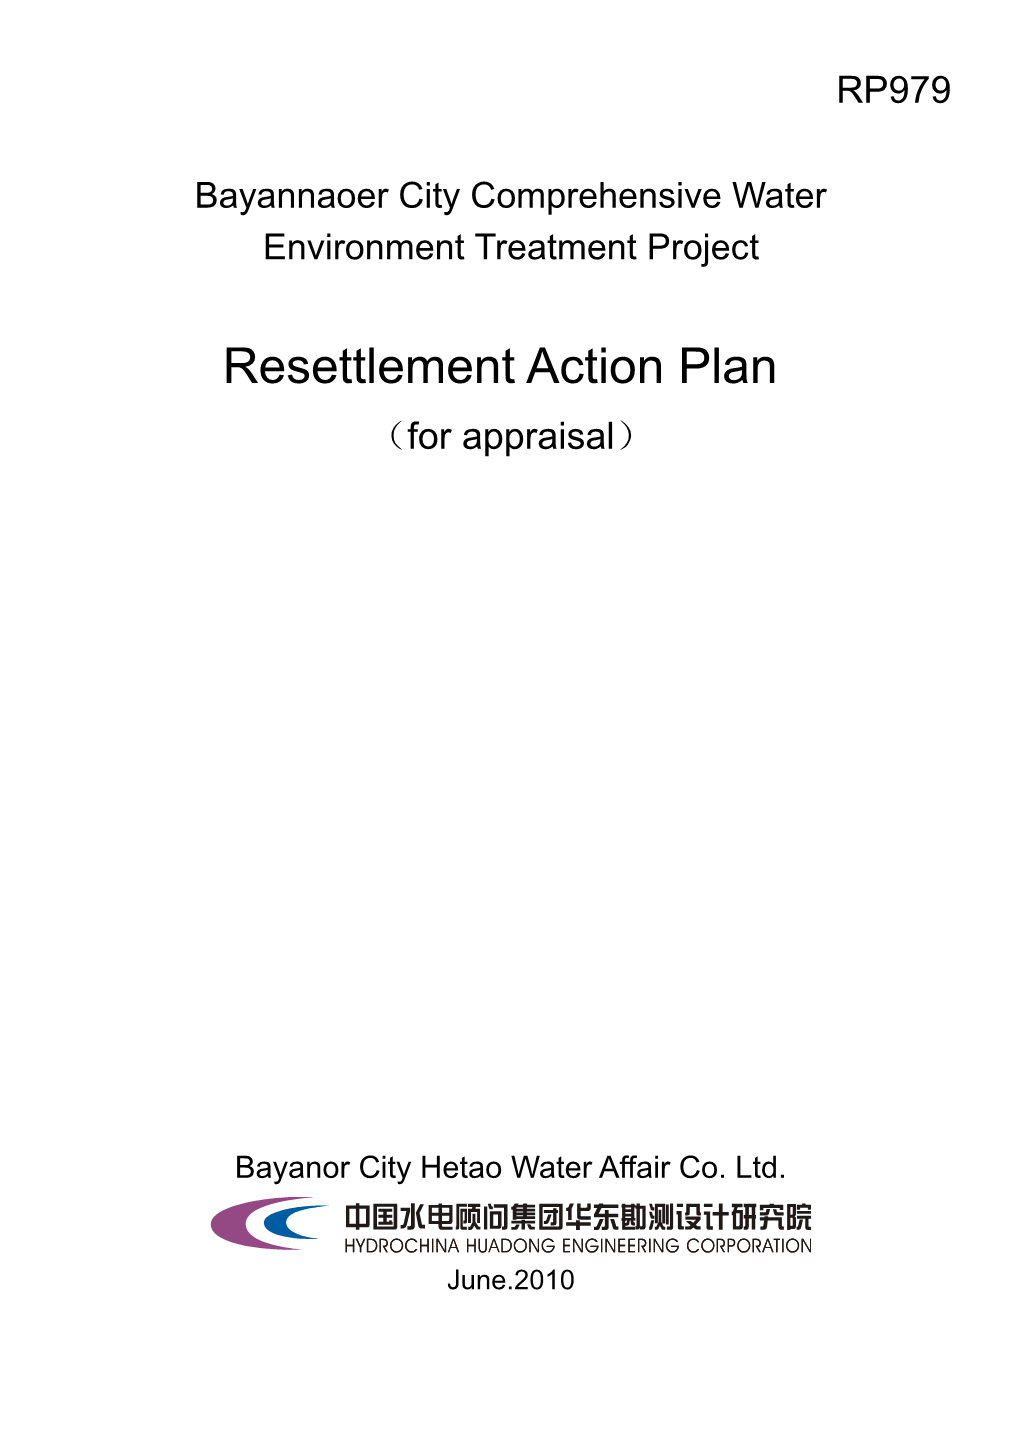 Bayannaoercity Comprehensive Water Environment Treatment Project